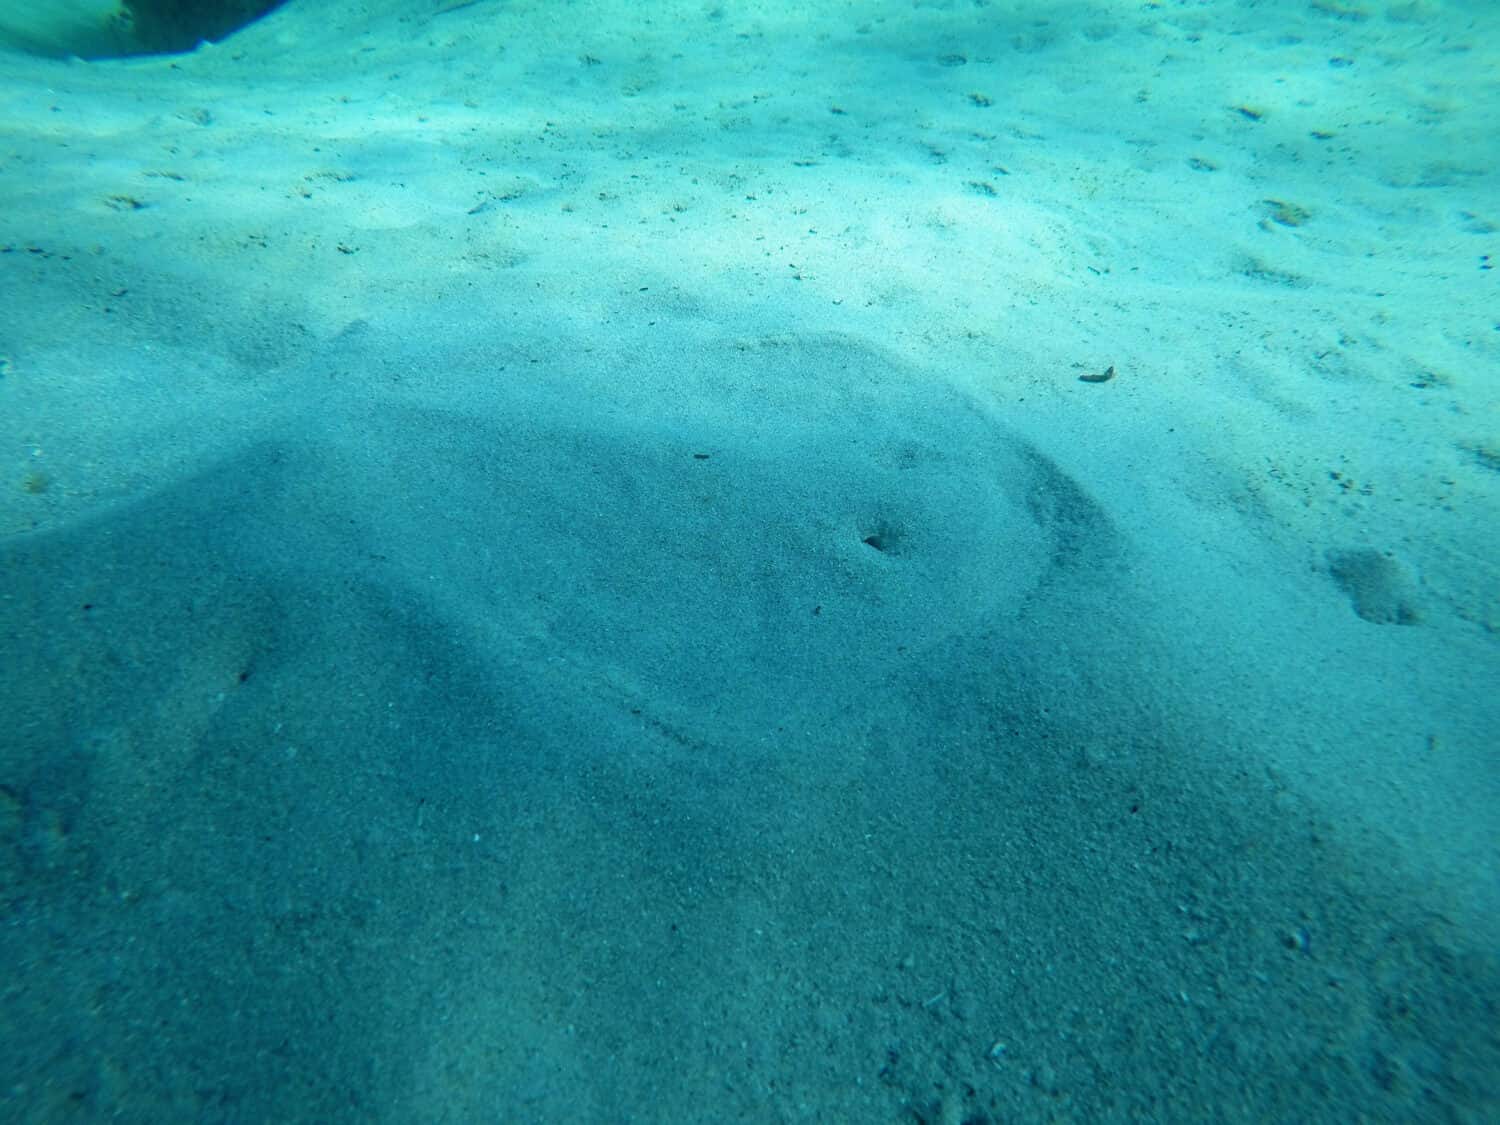 A baby stingray buried in the sand.